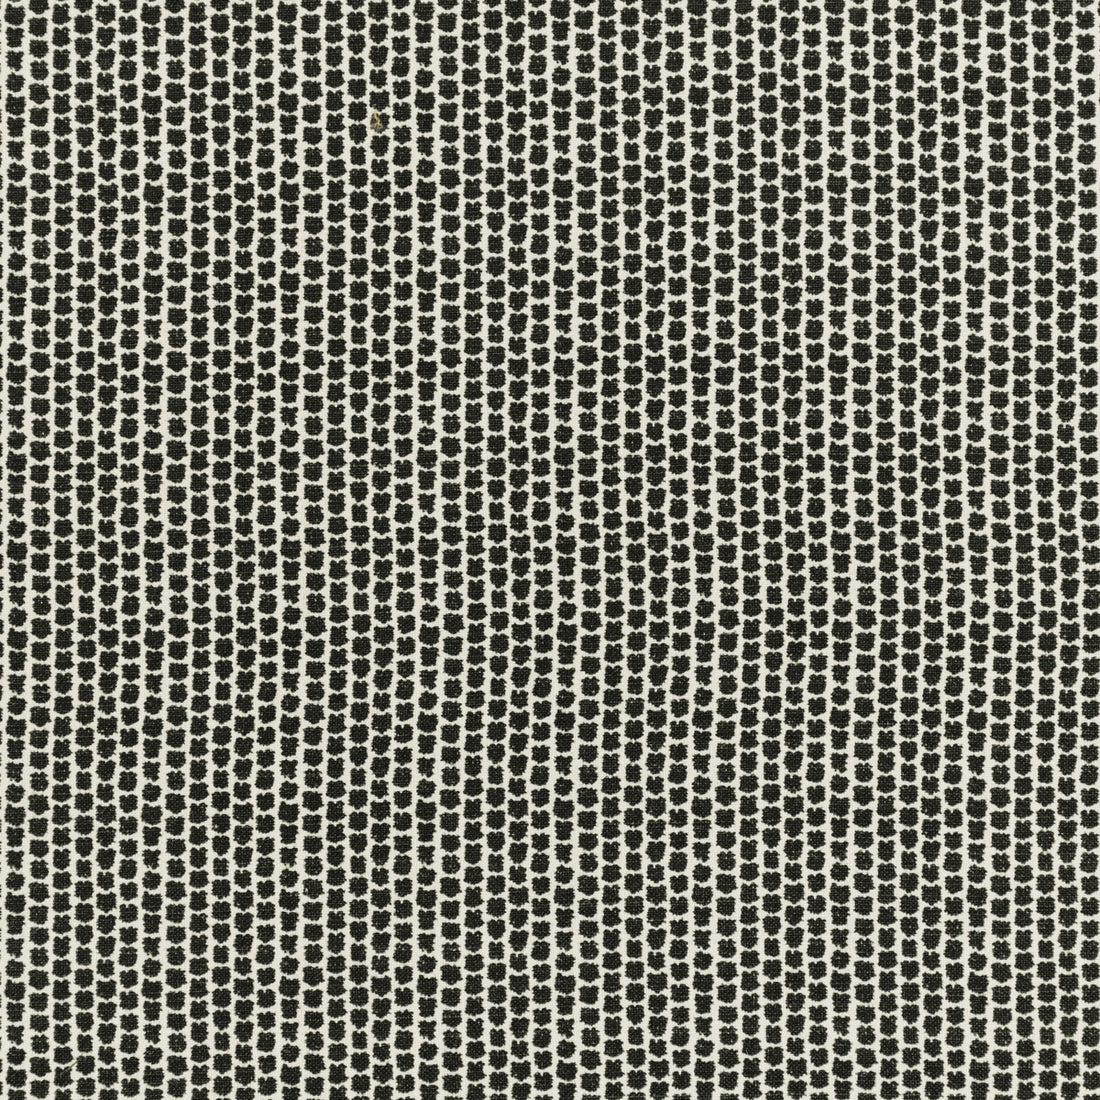 Kaya fabric in black color - pattern 2012101.81.0 - by Lee Jofa in the Breckenridge collection